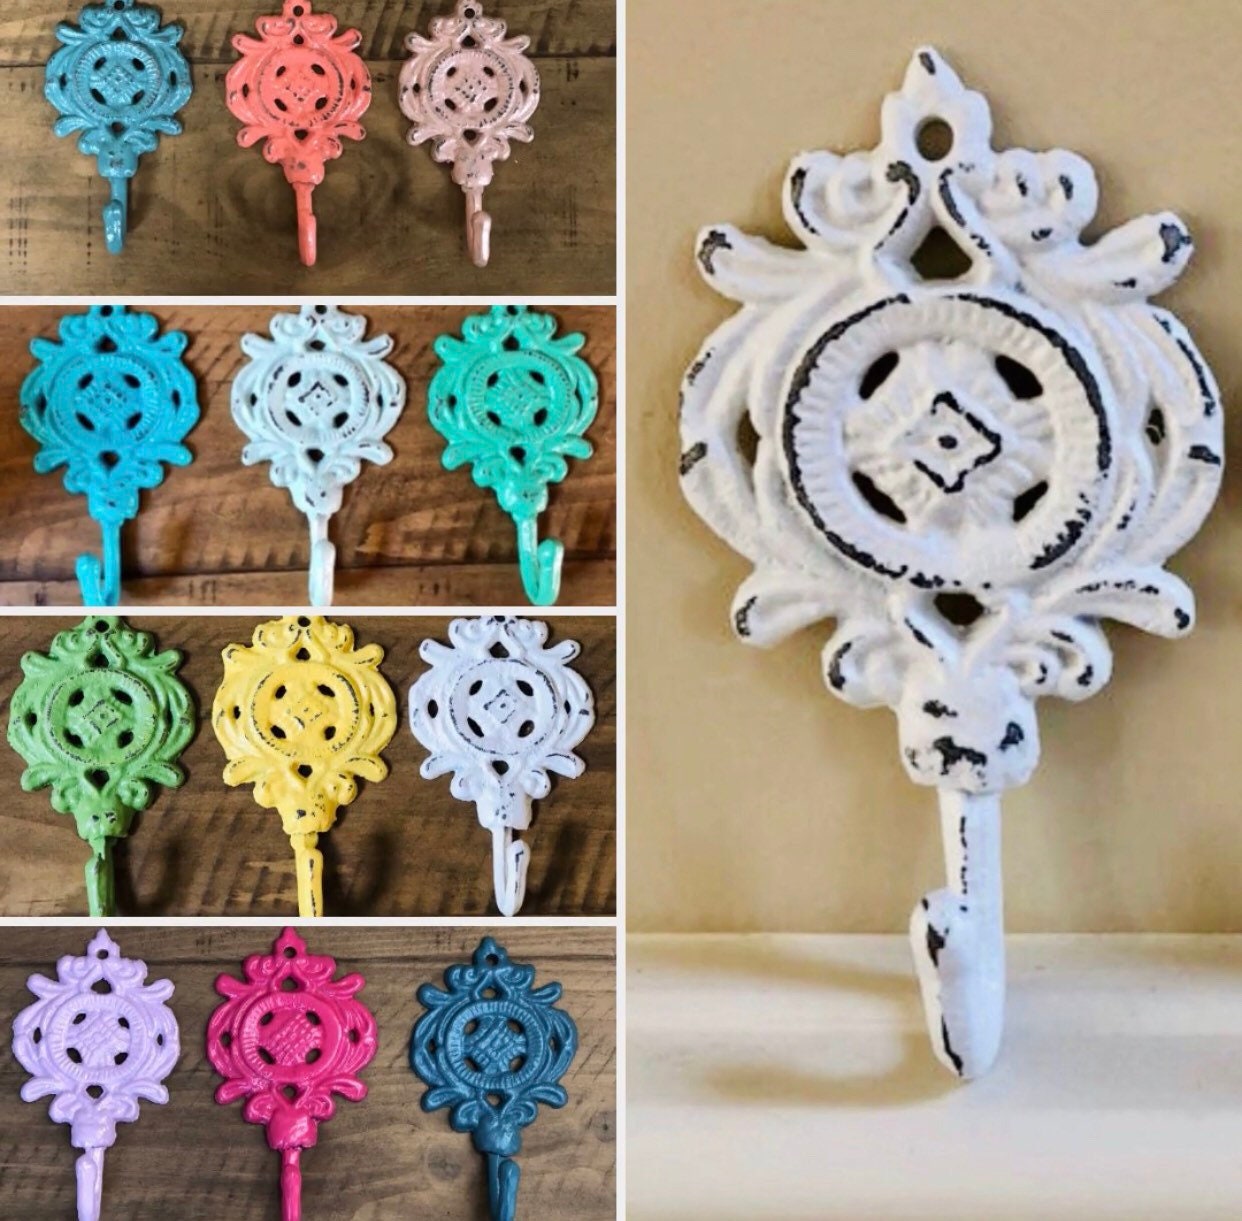 Cast iron Decorative wall hook/Pick color/ Shabby chic metal hooks/ Vintage hook/ cabin/ french country/ beach/ metal wall hook/mud room